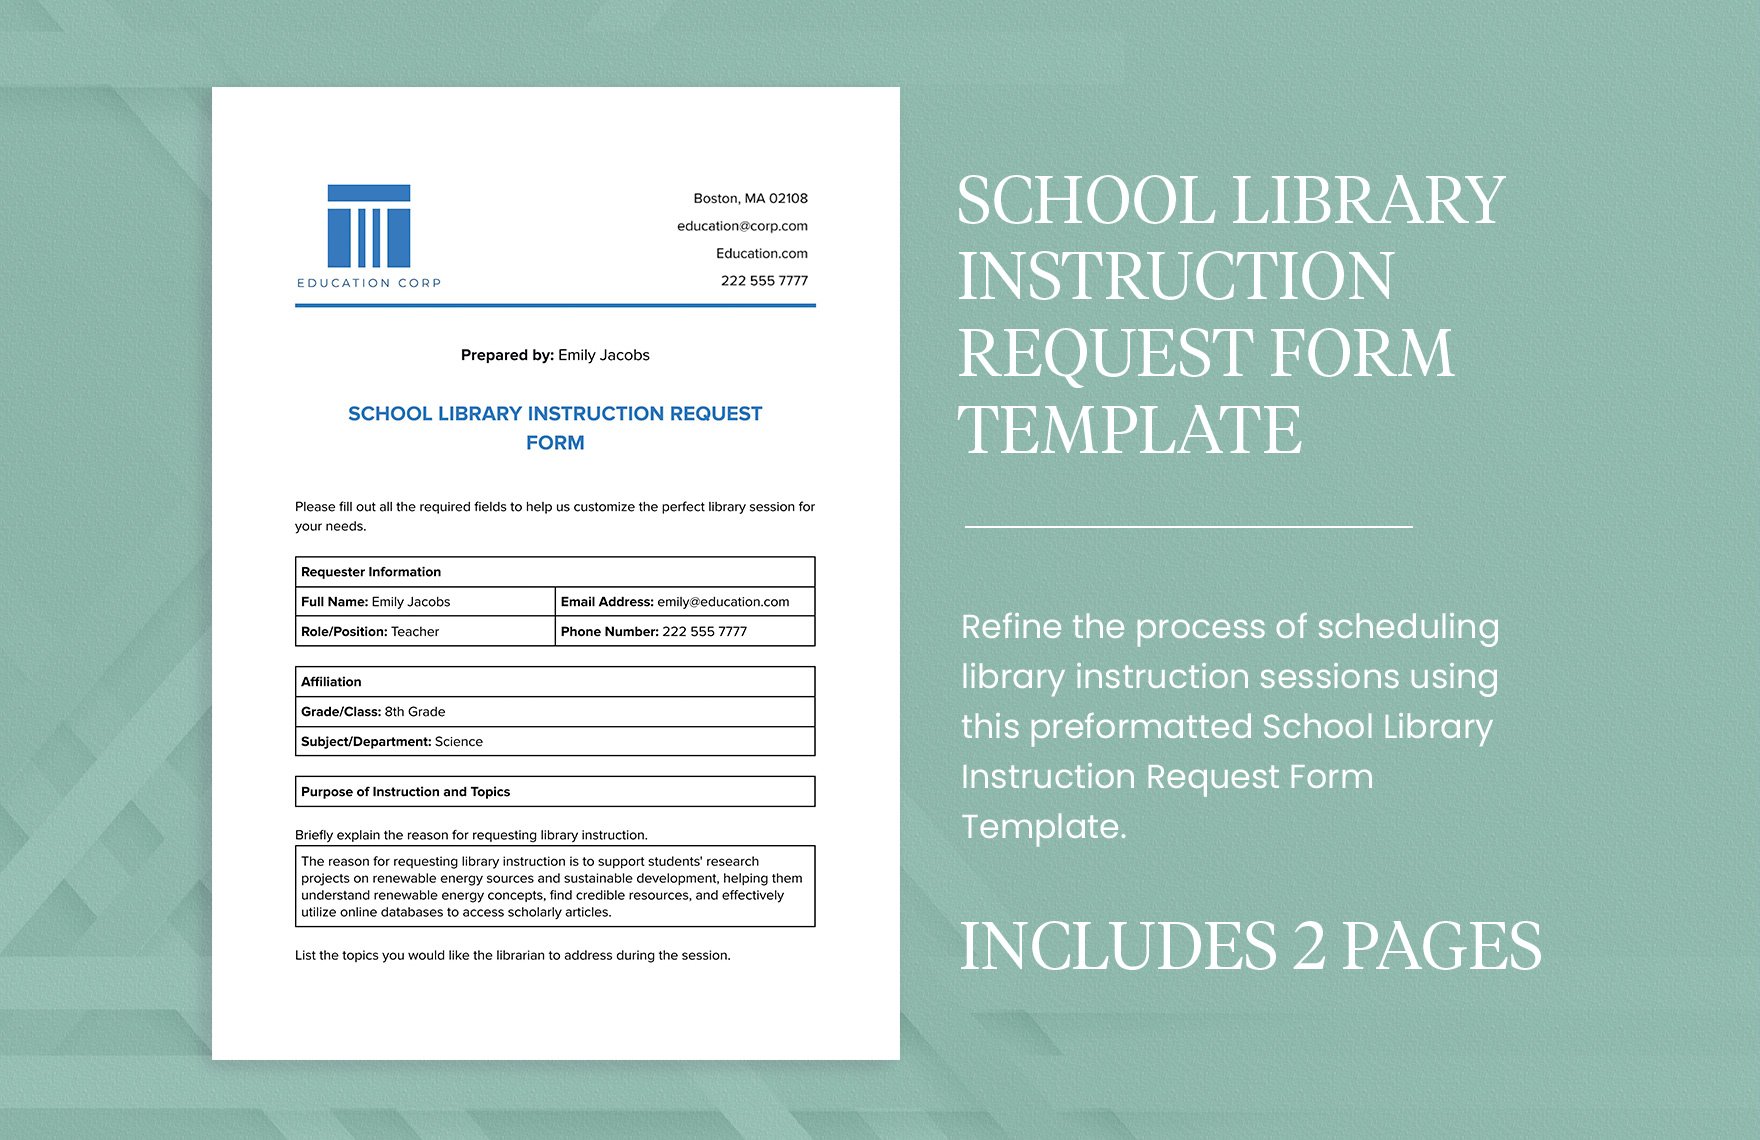 School Library Instruction Request Form Template in Word, Google Docs, PDF